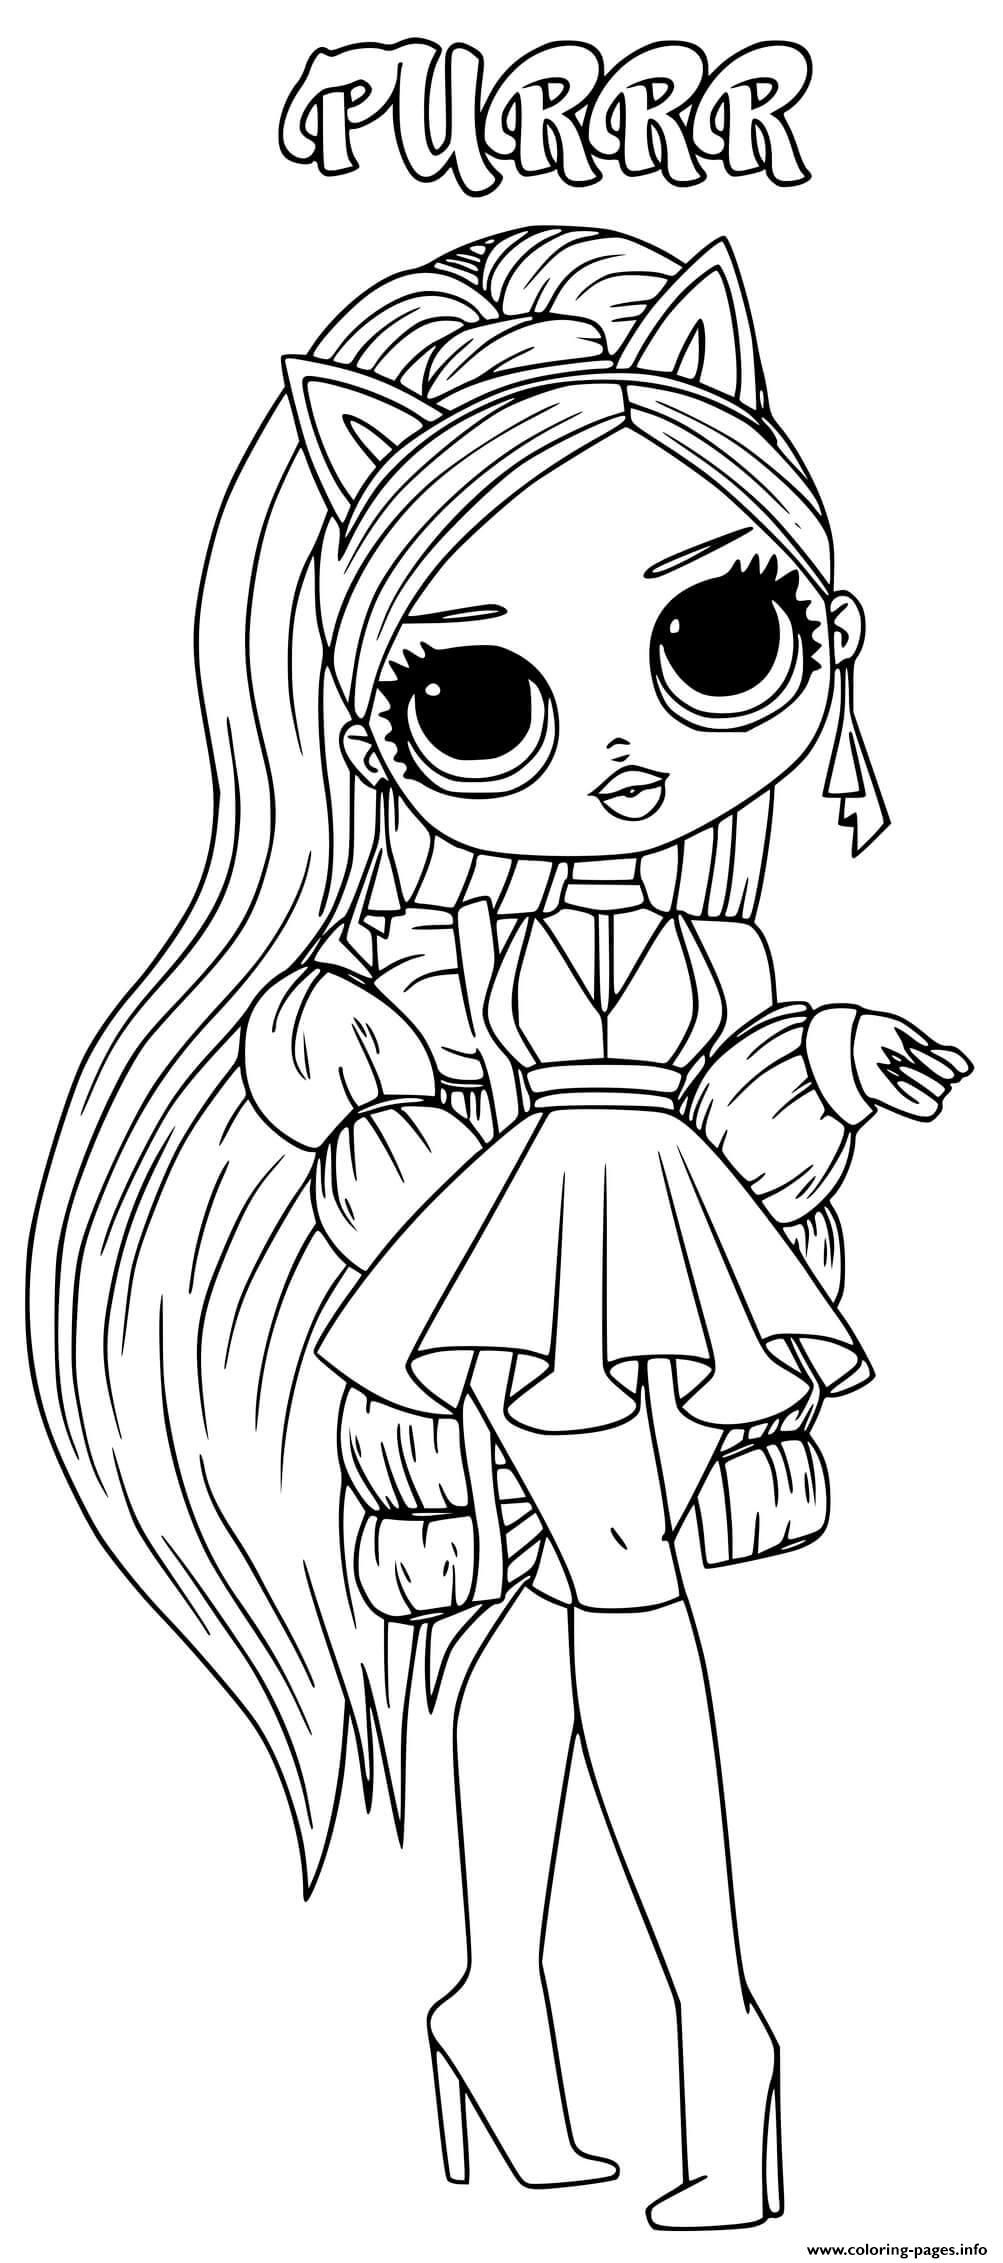 Print Lol Omg Purr Baby Coloring Pages Baby Coloring Pages, Detailed à Dessin A Imprimer Poupee Lol